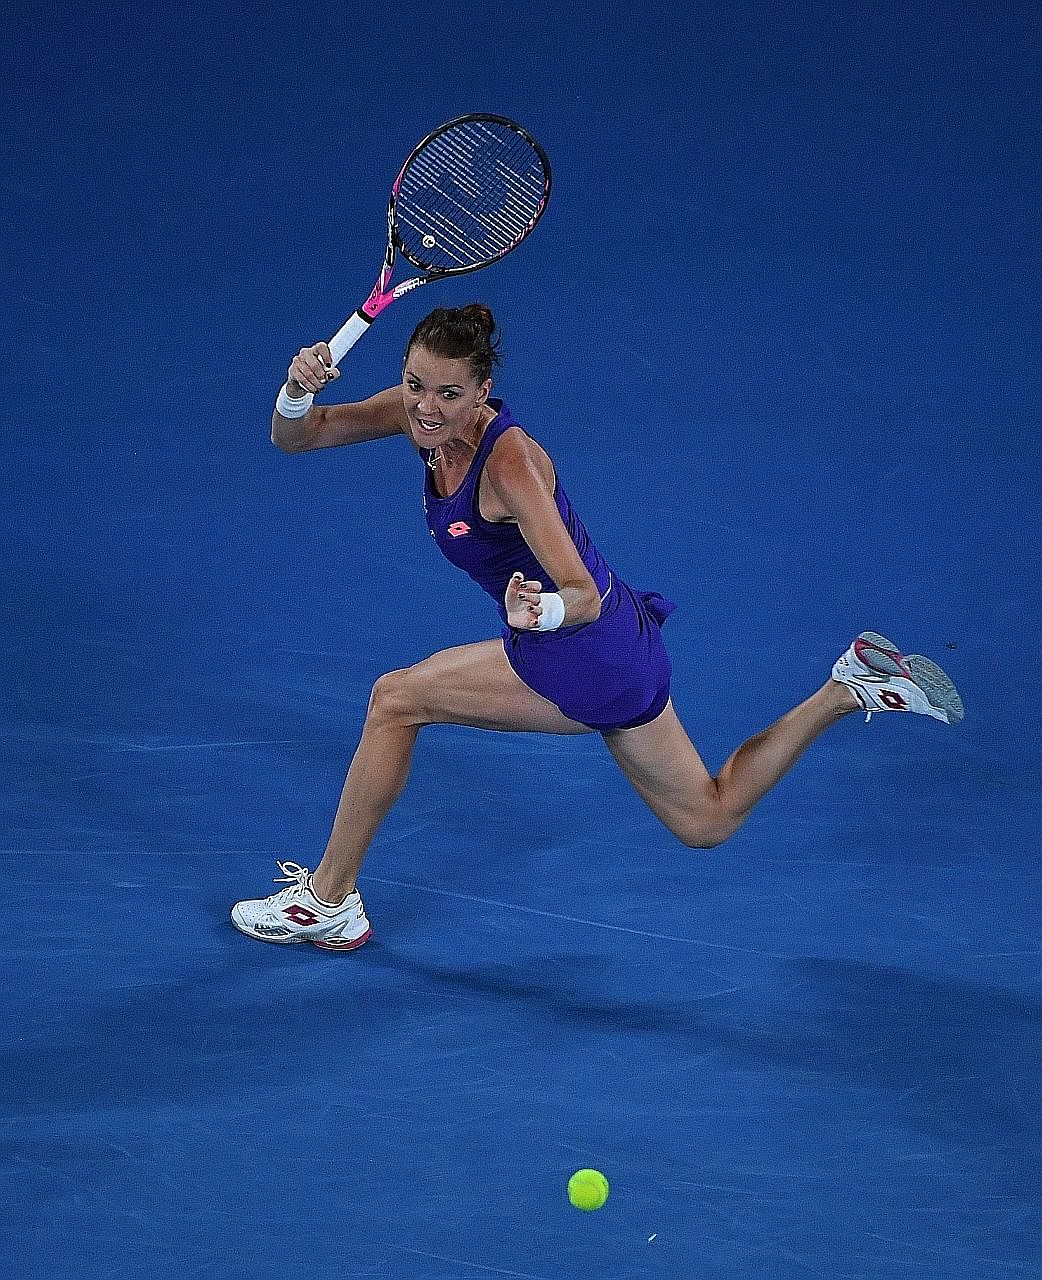 Poland's Agnieszka Radwanska, the world No. 8, is 28 and says she has no plans to keep playing like Serena Williams, who will be 36 when the WTA Finals come around, especially since the younger players have become far more competent and dangerous.